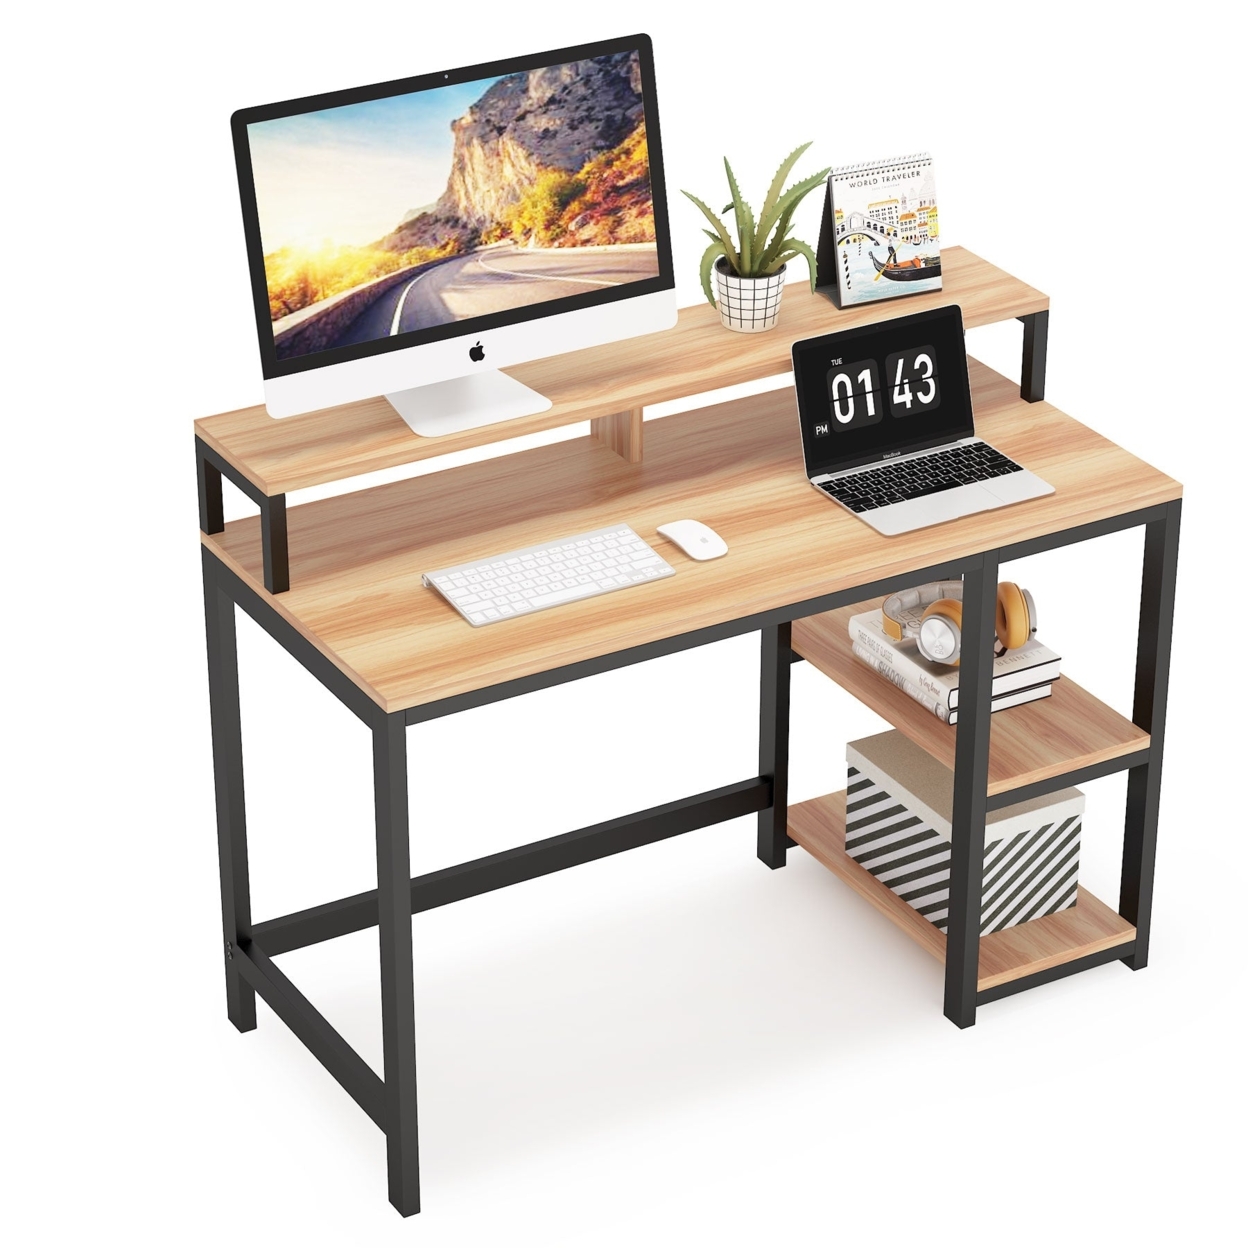 Tribesigns Computer Desk Industrial Writing Desk For Study - Maple Wood